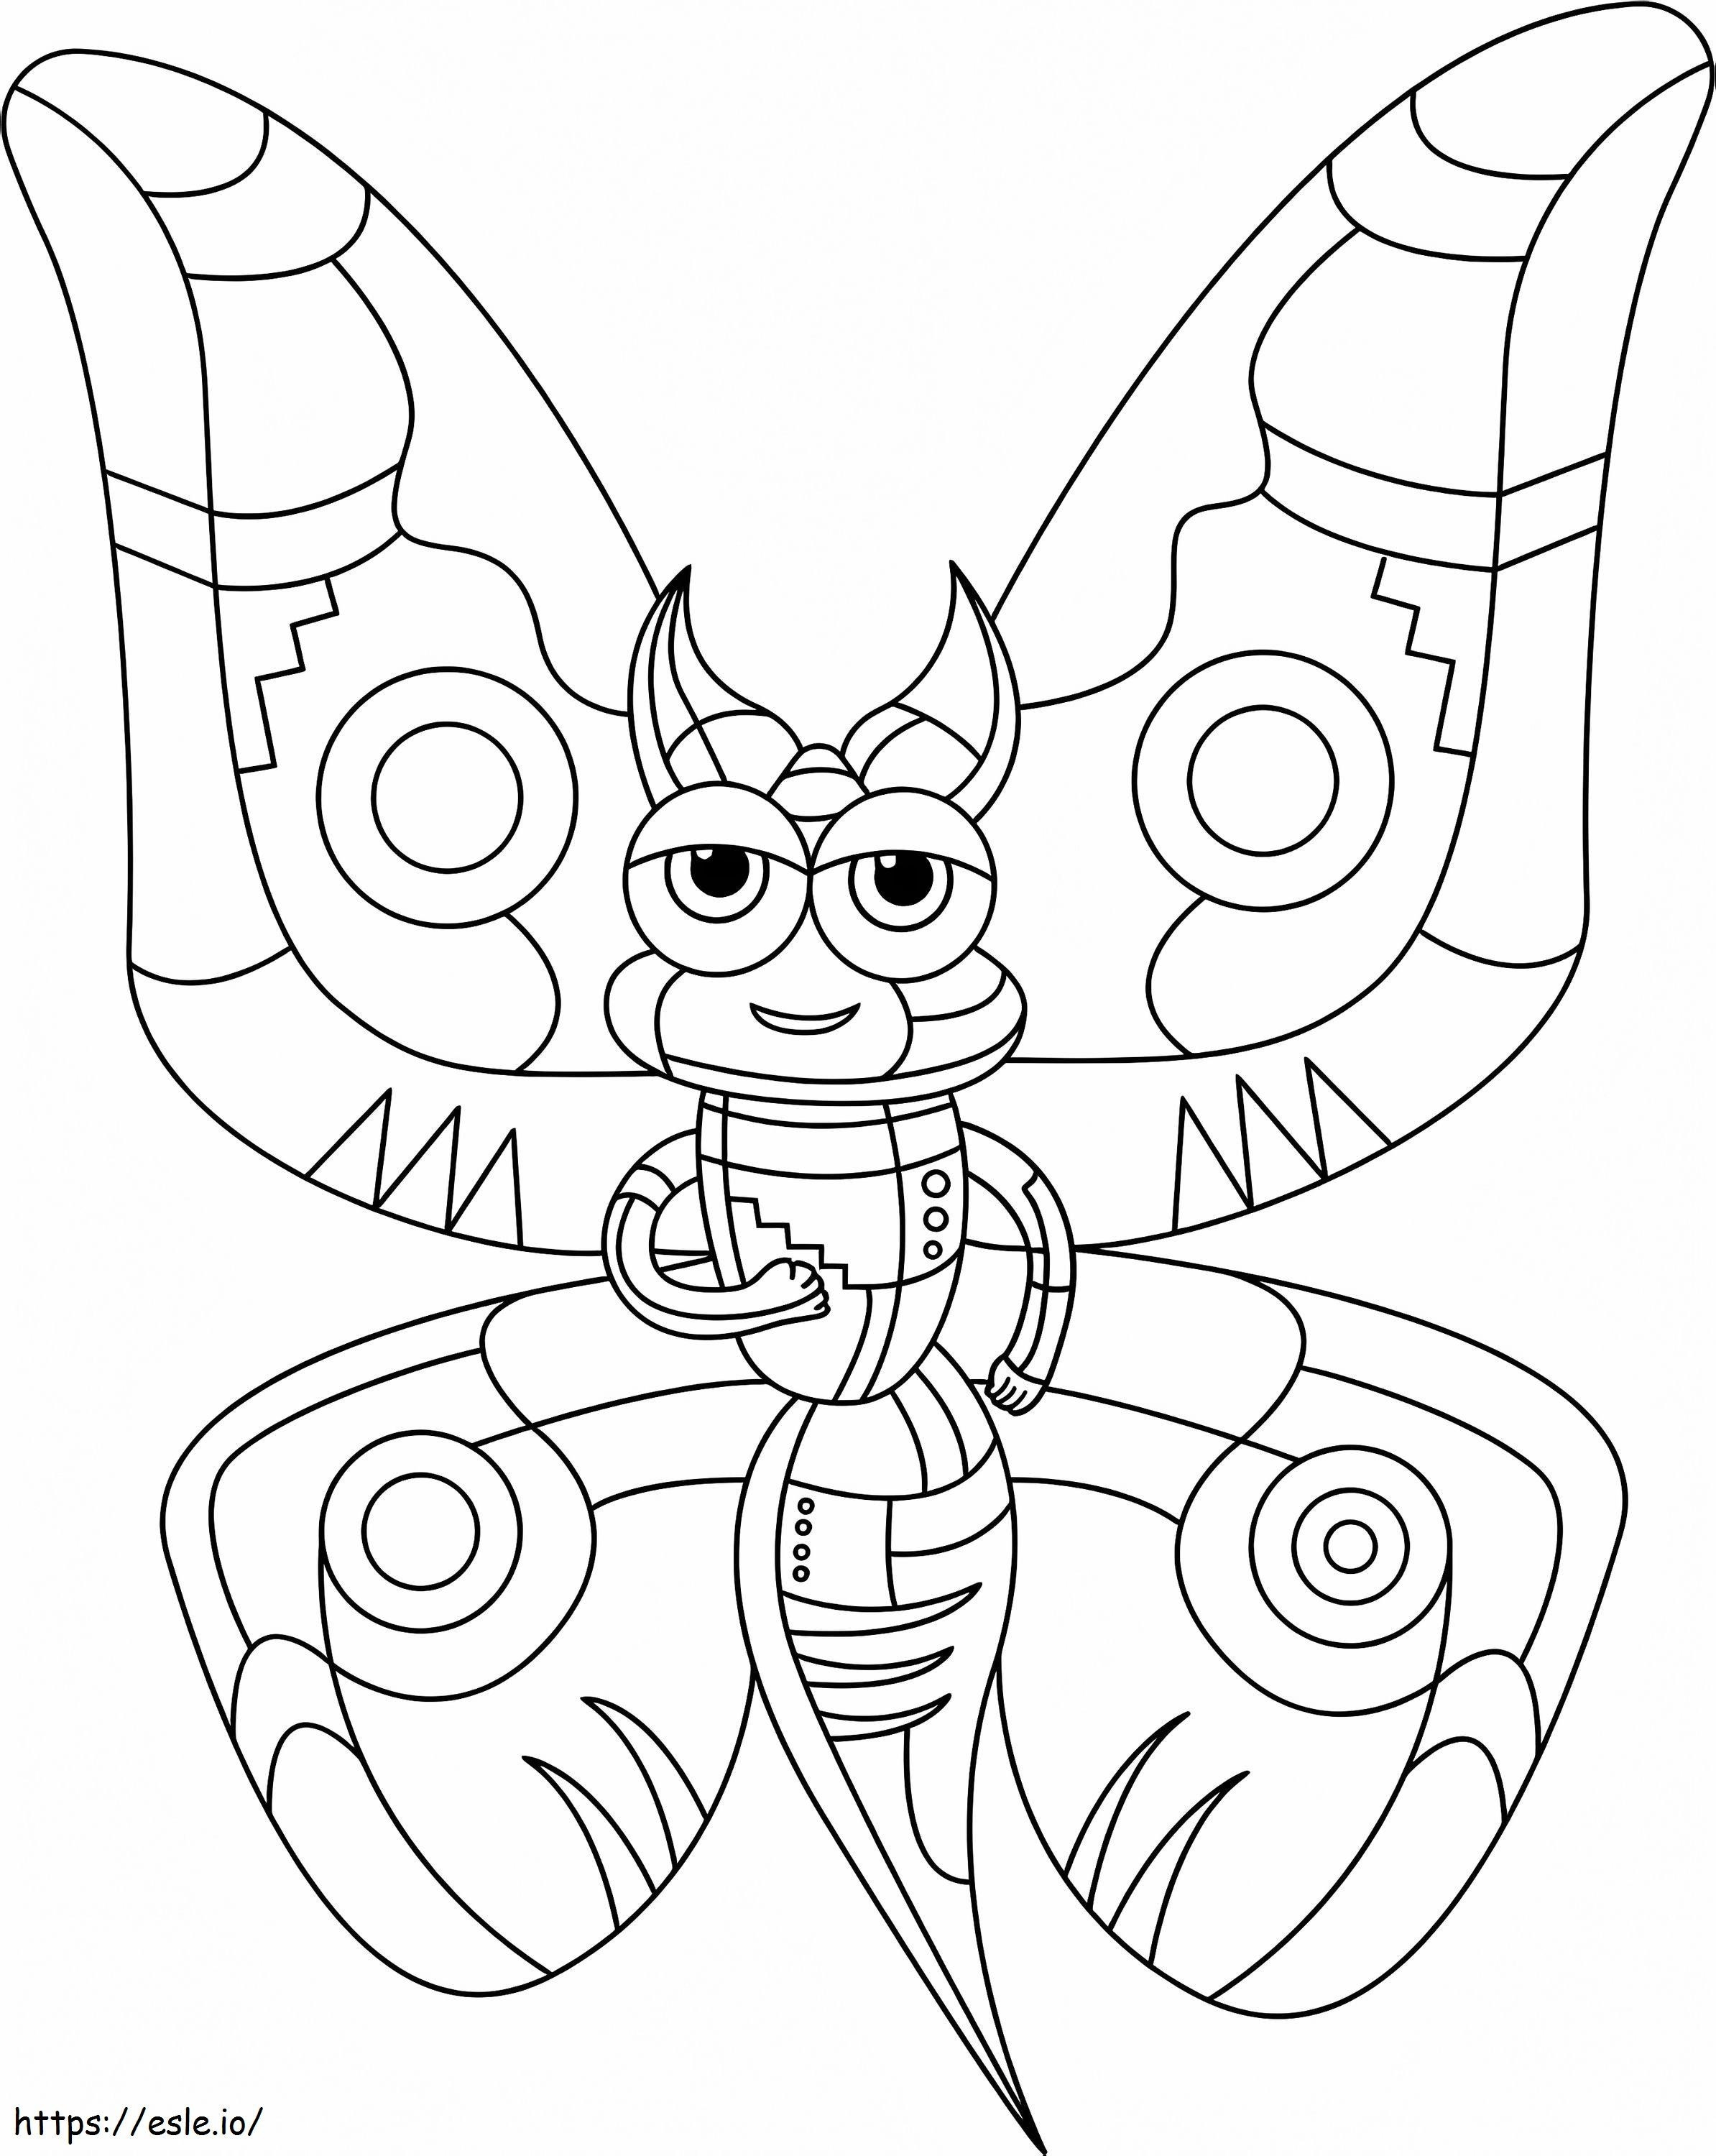 Abstract Butterfly coloring page